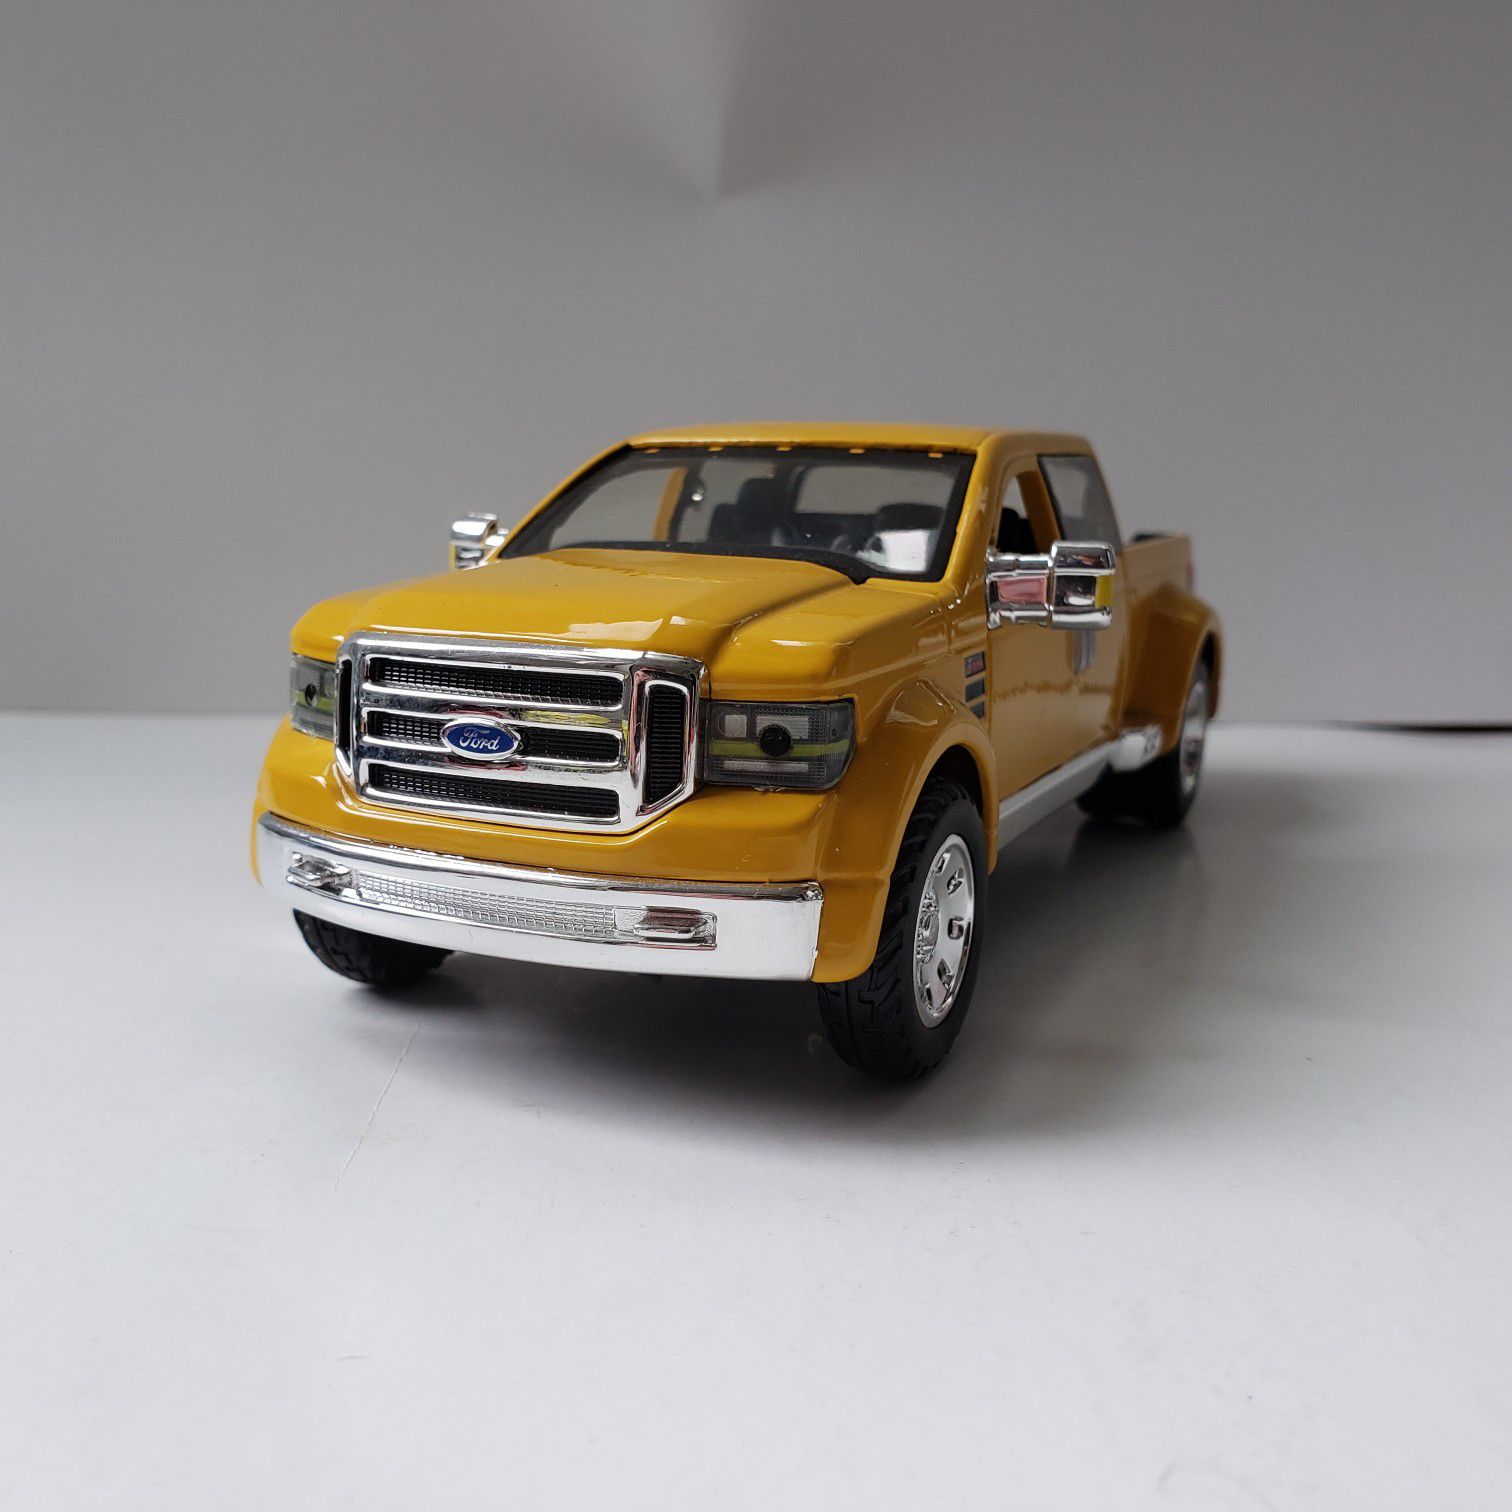 NEW Large Ford Yellow Mighty F-350 Super Duty Pickup Truck Car Toy Diecast Metal Model Scale 1/31 1:31 131 F350